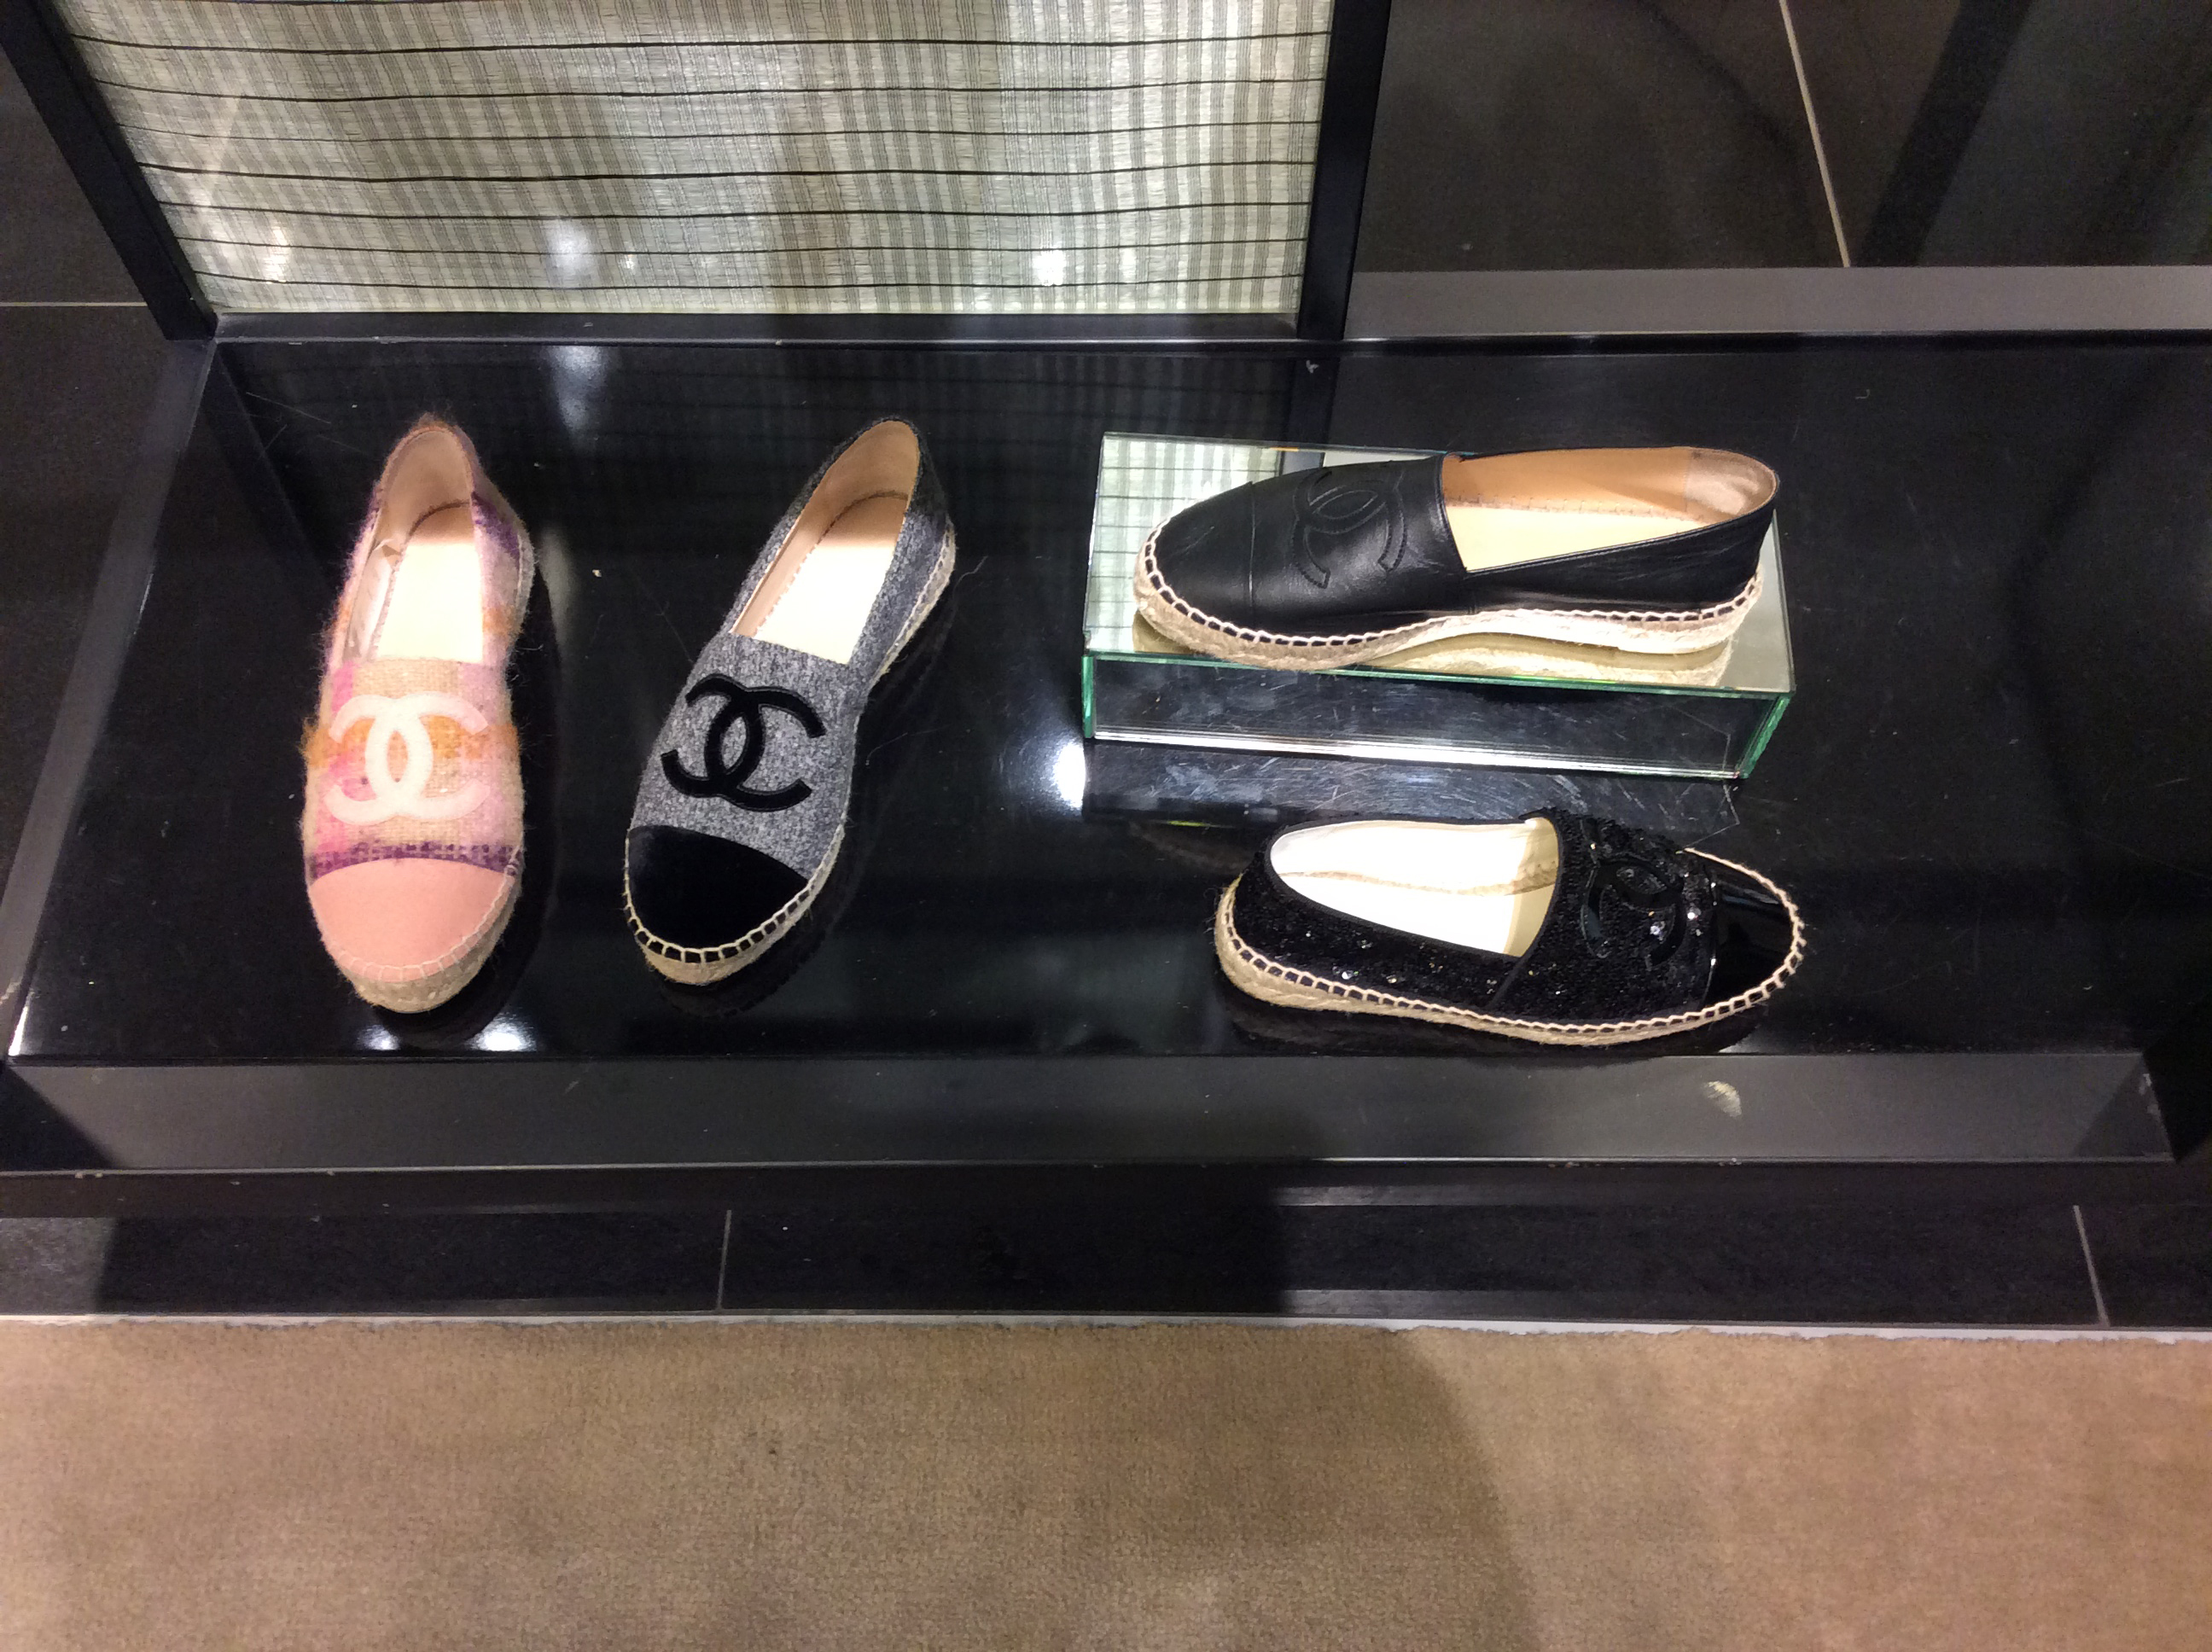 Chanel Shoes | In-Store Trends at 